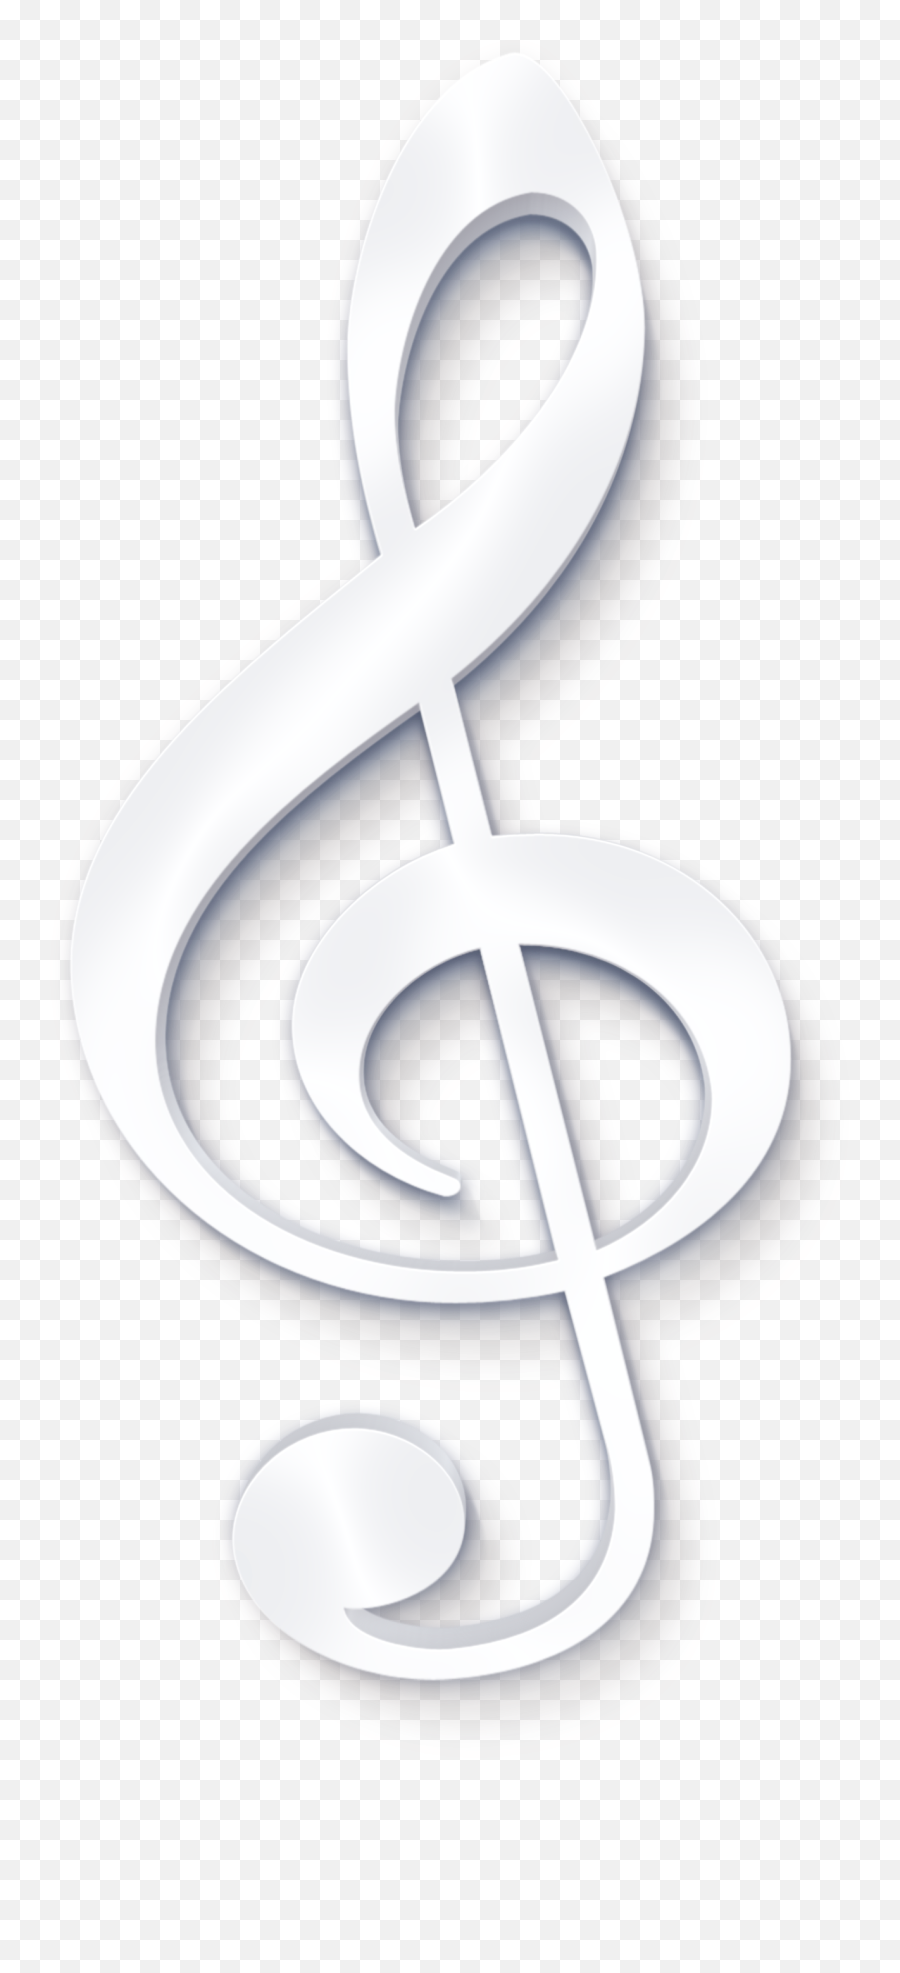 Treble Clef Music - Free Image On Pixabay Music Symbol In White Png,Treble Clef Transparent Background